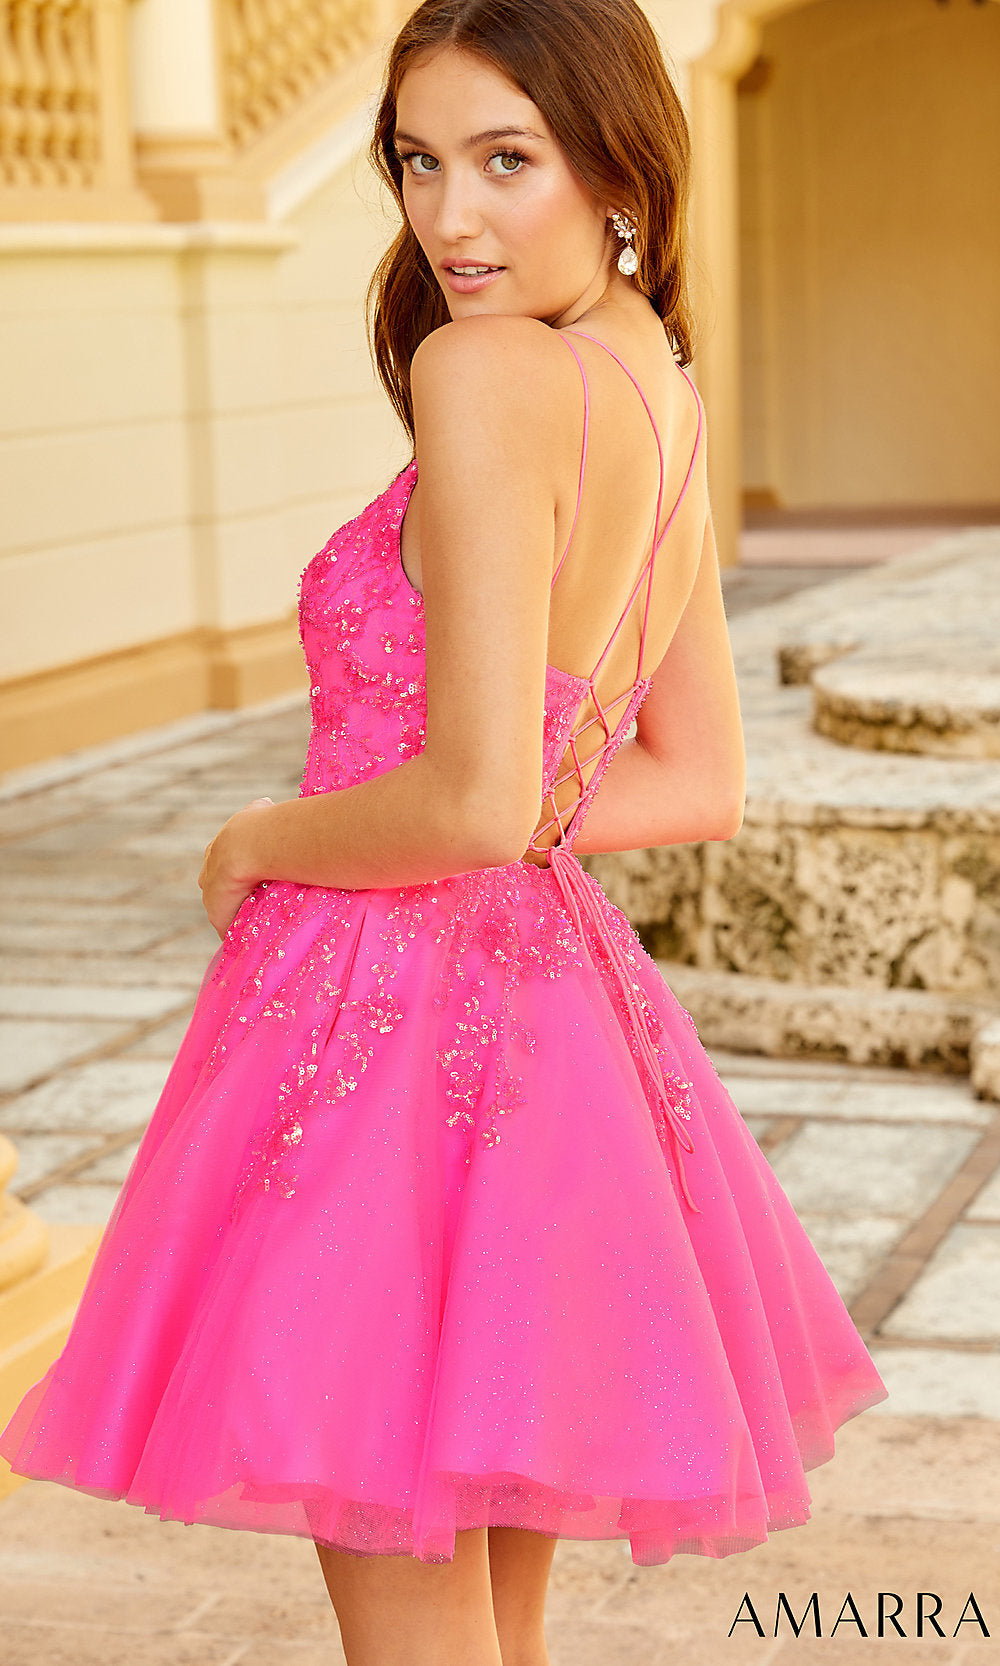 Neon Pink Short Homecoming Dress with Pockets